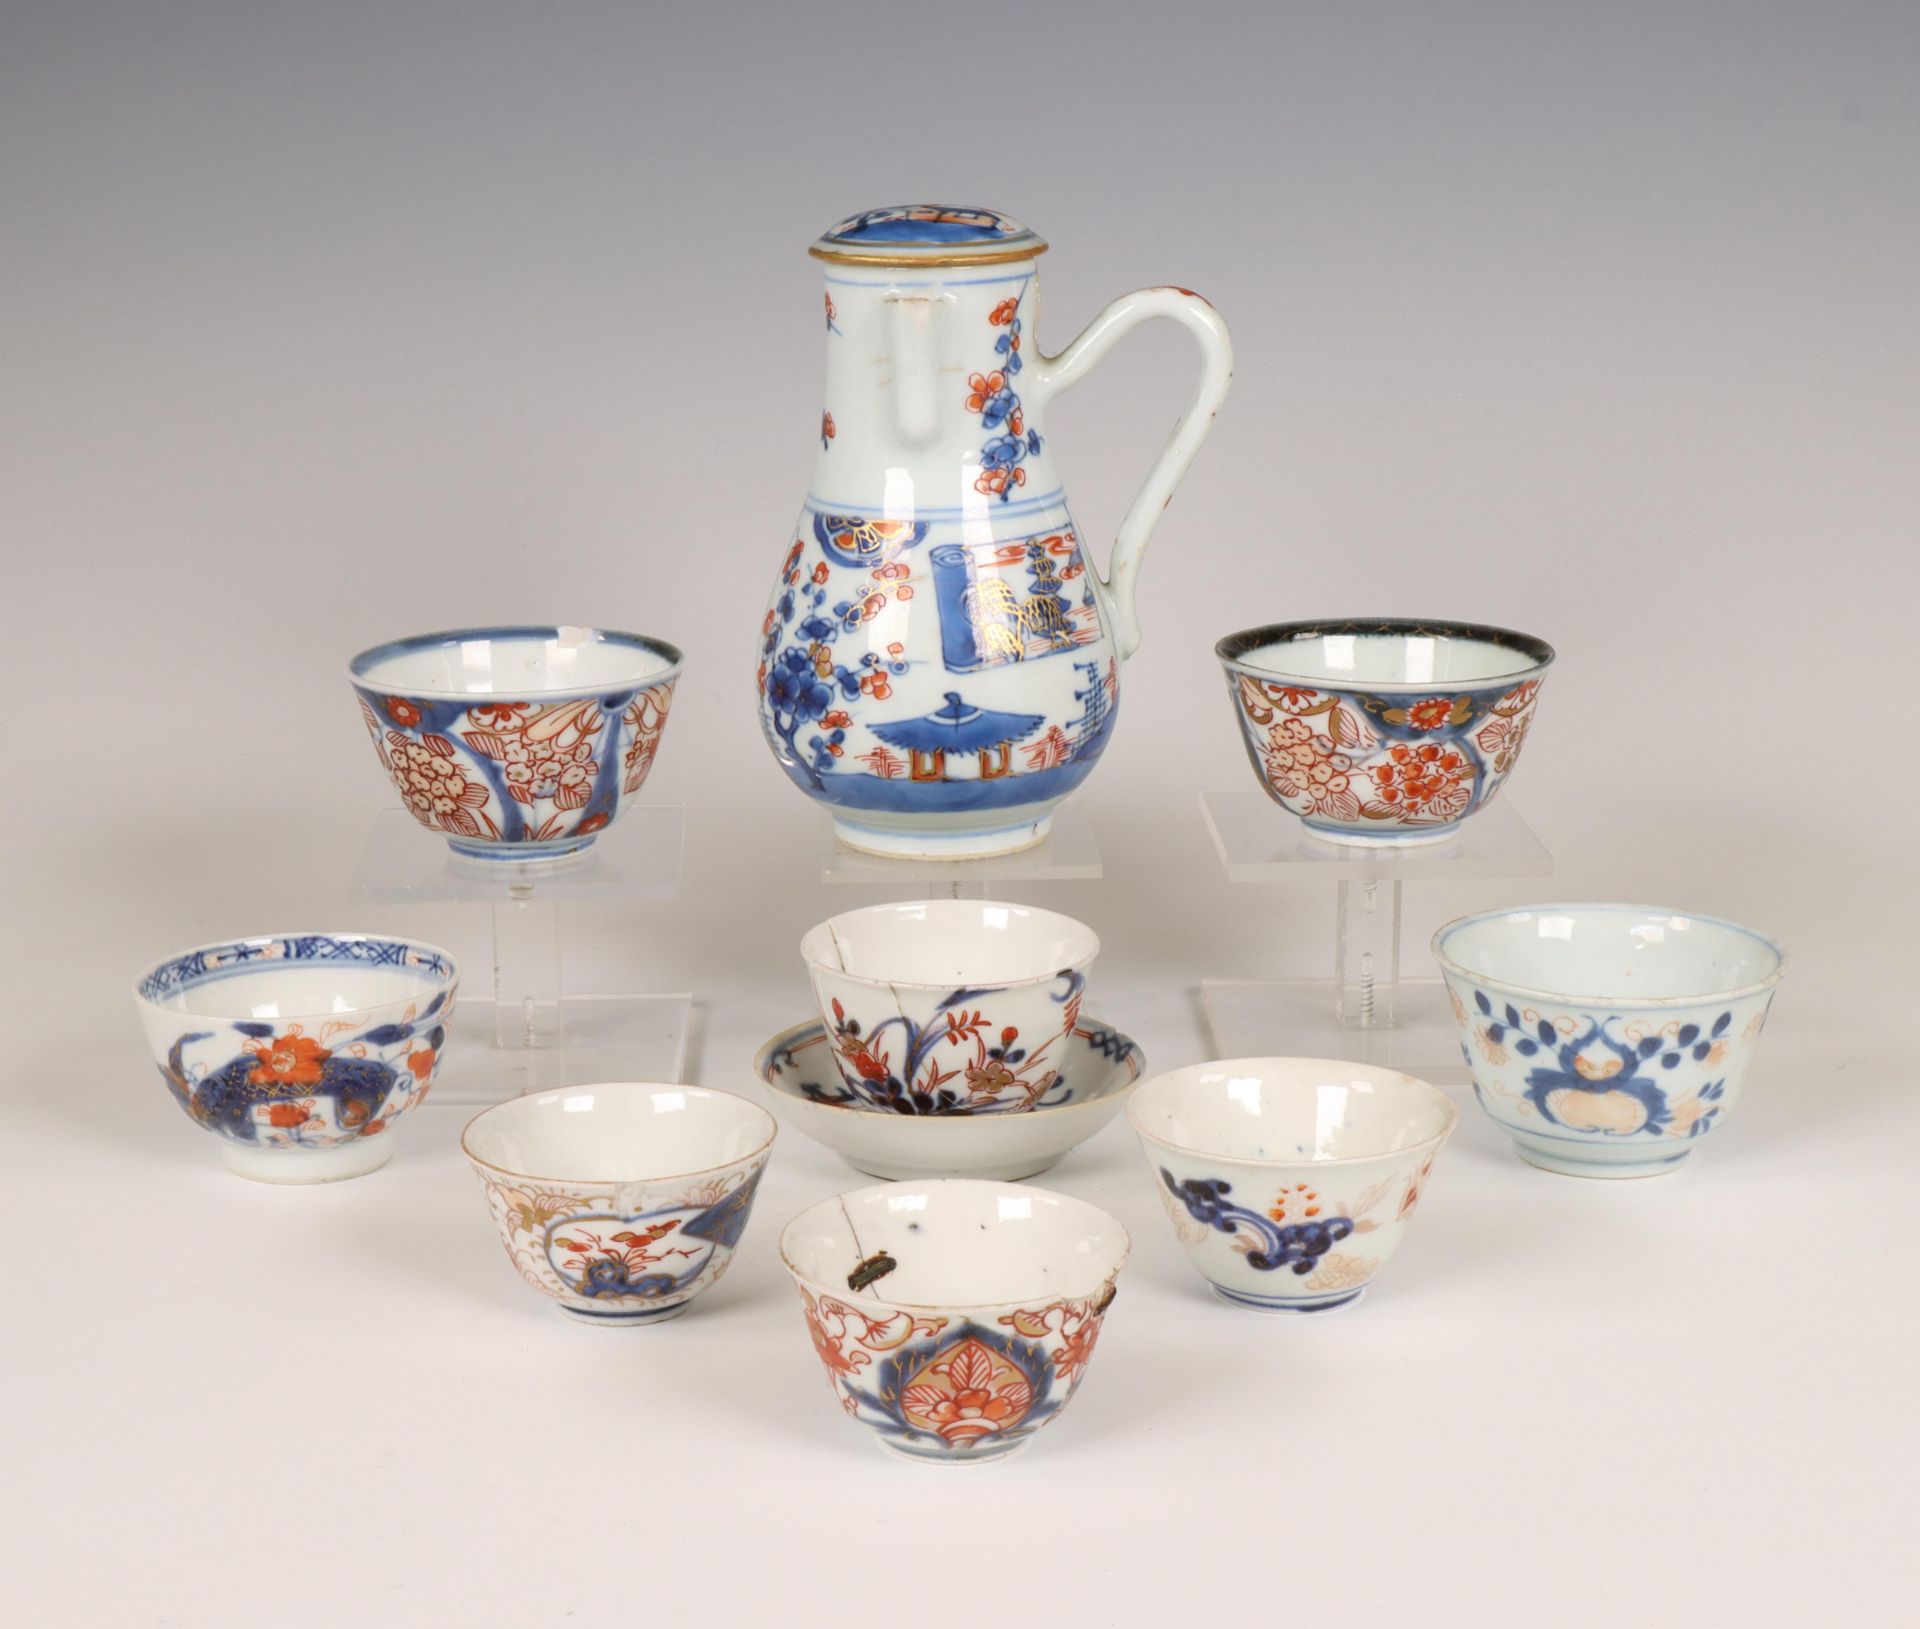 China and Japan, small collection of Imari porcelain, 18th century, - Image 3 of 3